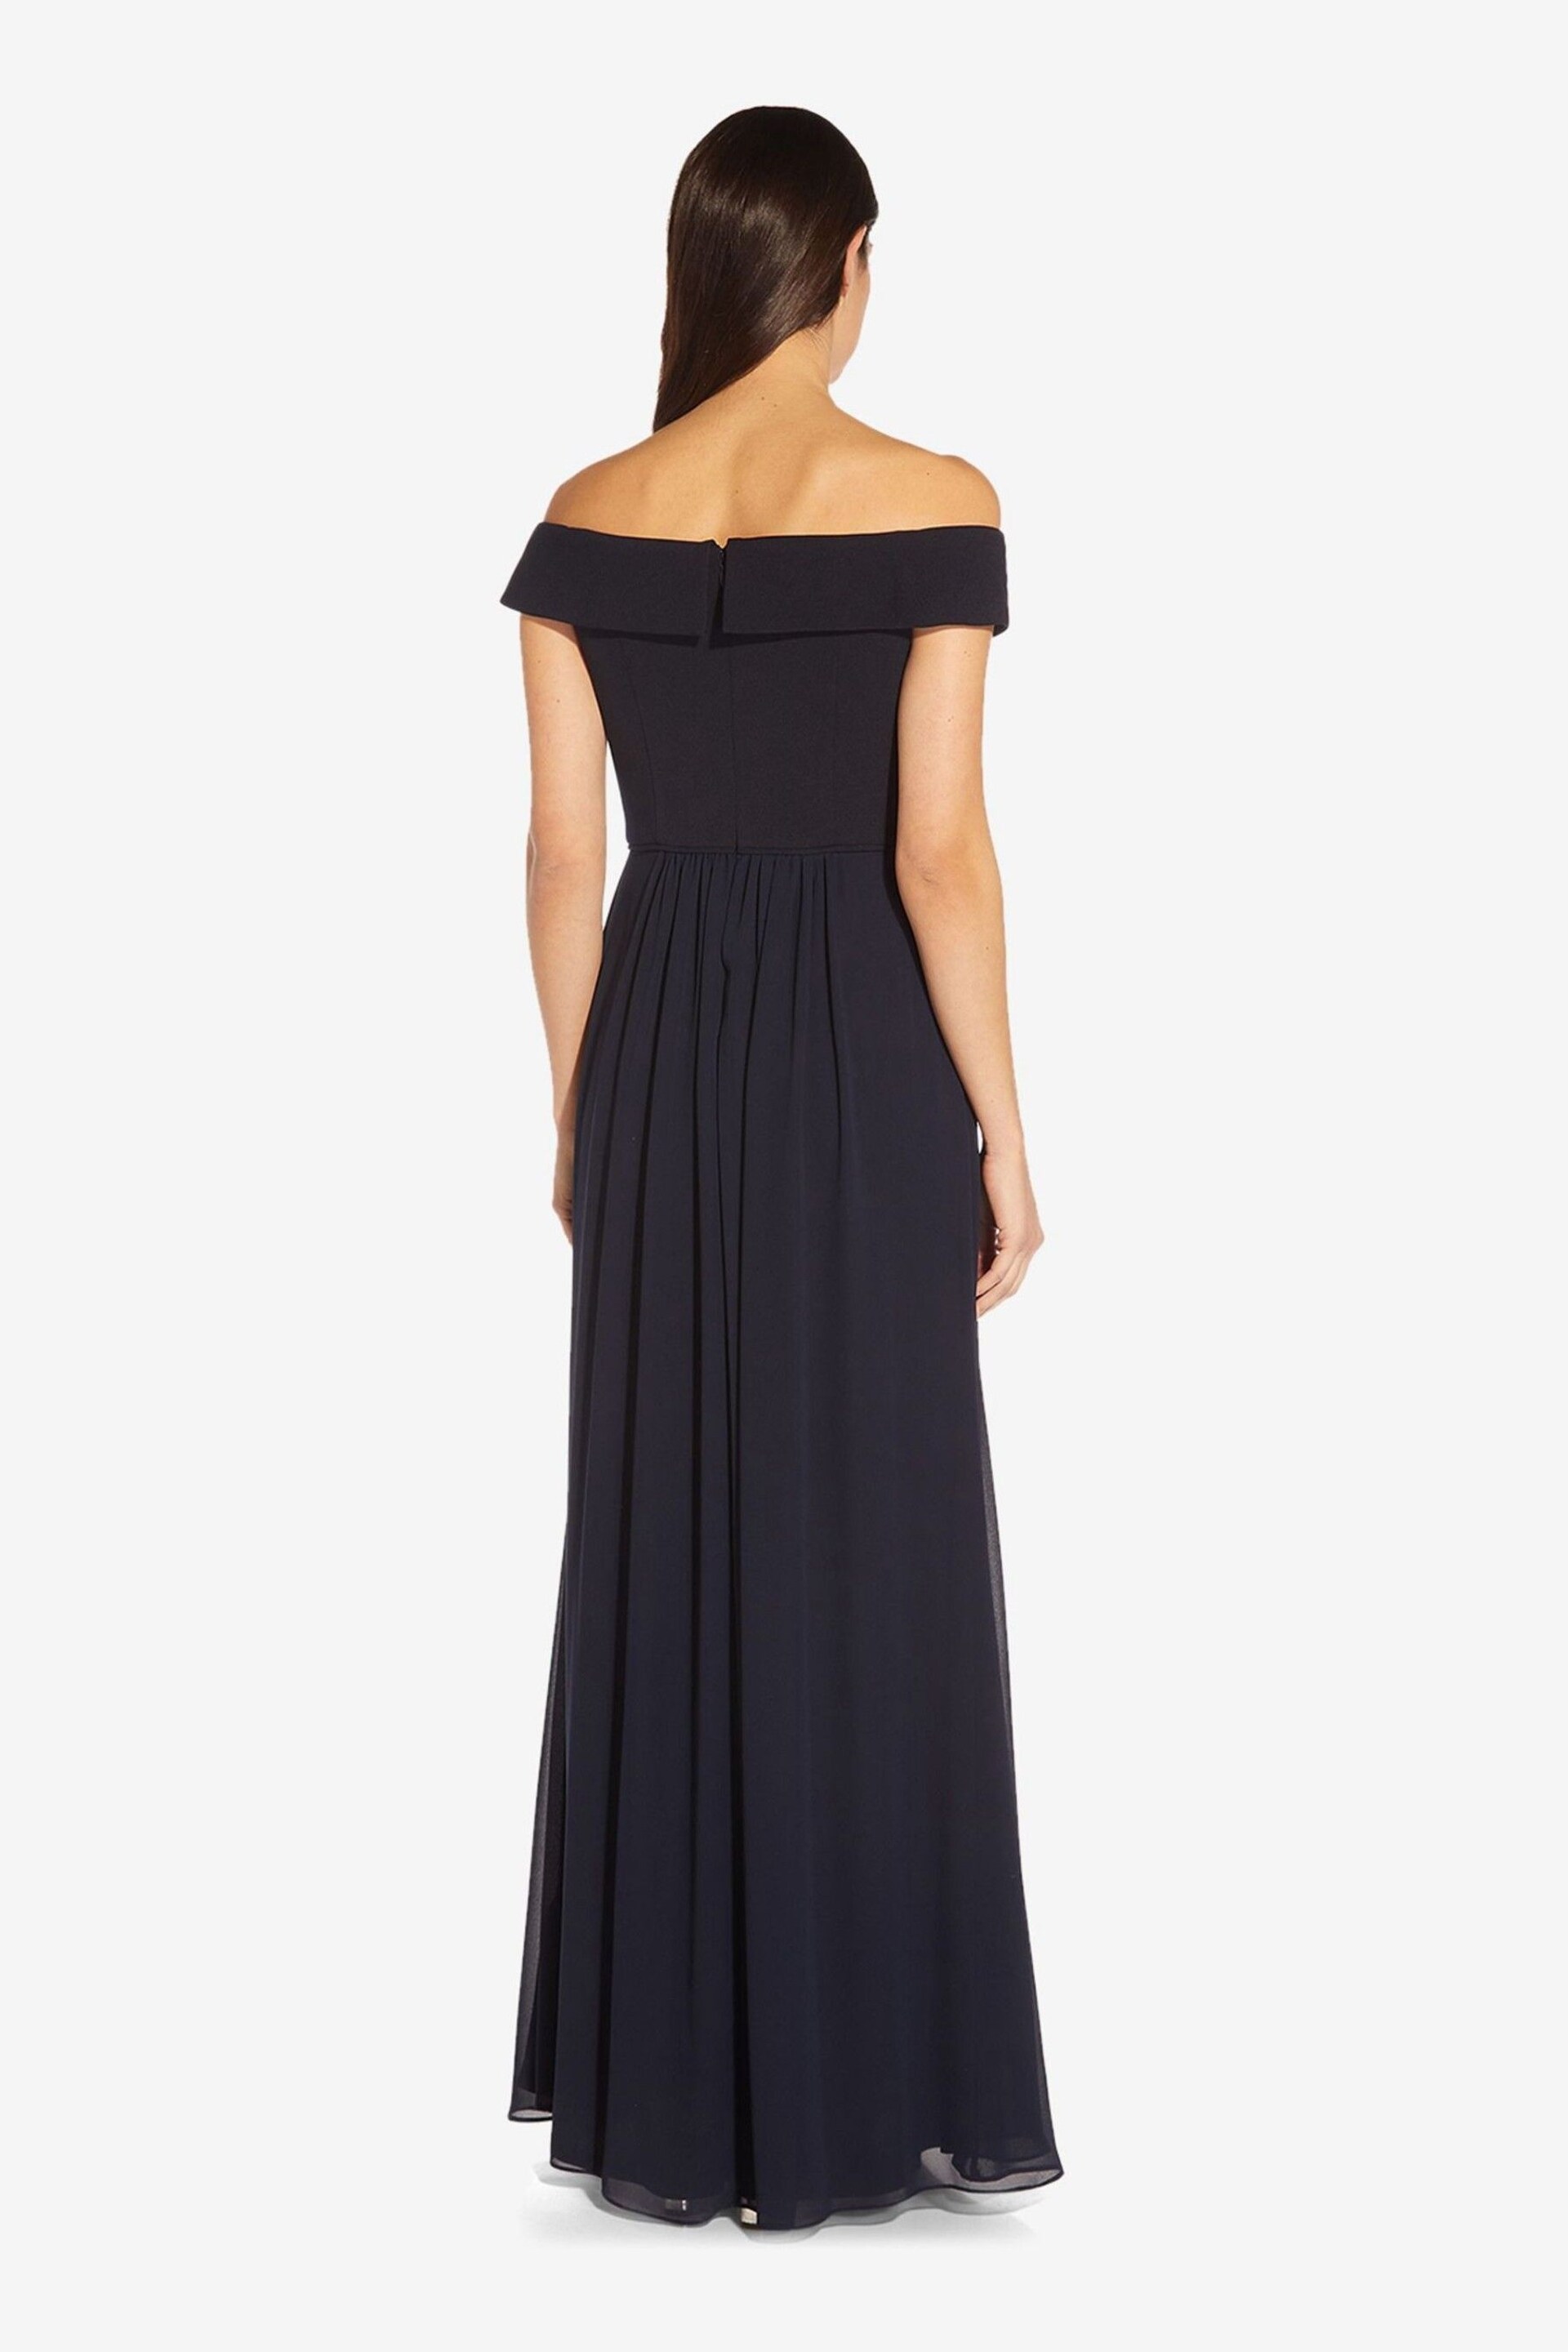 Adrianna Papell Crepe Chiffon Gown - Image 2 of 5